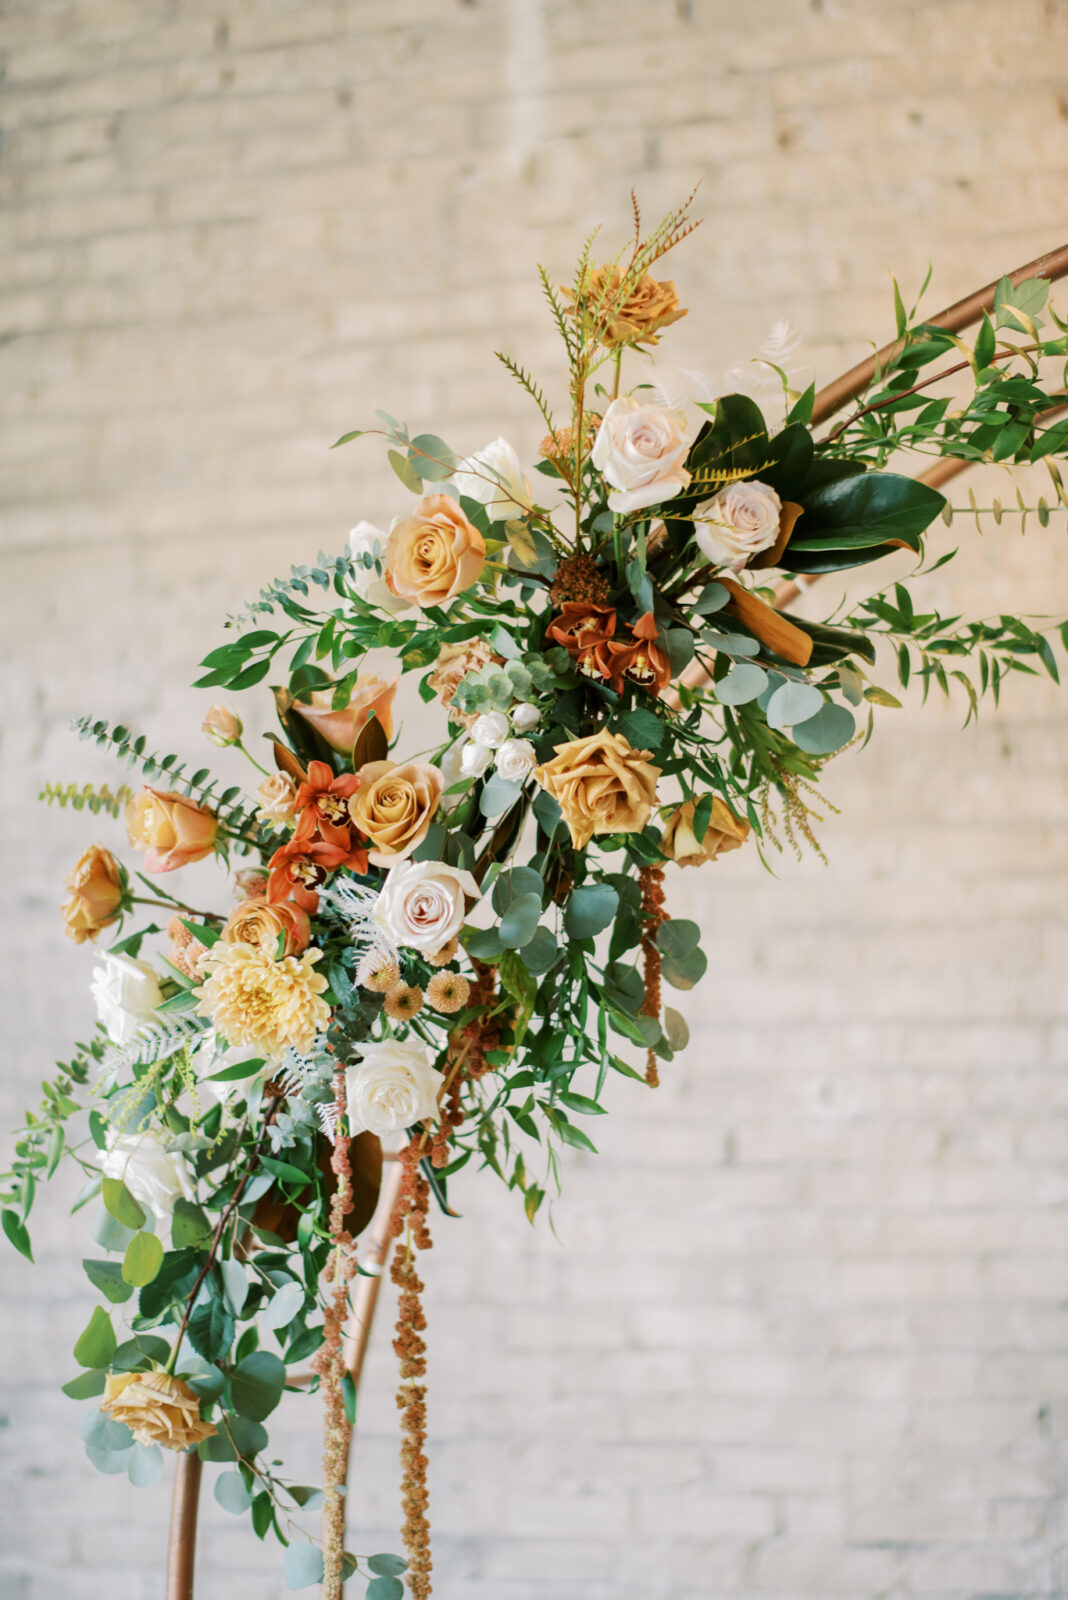 gold circular arch with fall-toned florals and greenery at the end of the aisle, circular arch shape inspiration, October wedding colours in autumn hues